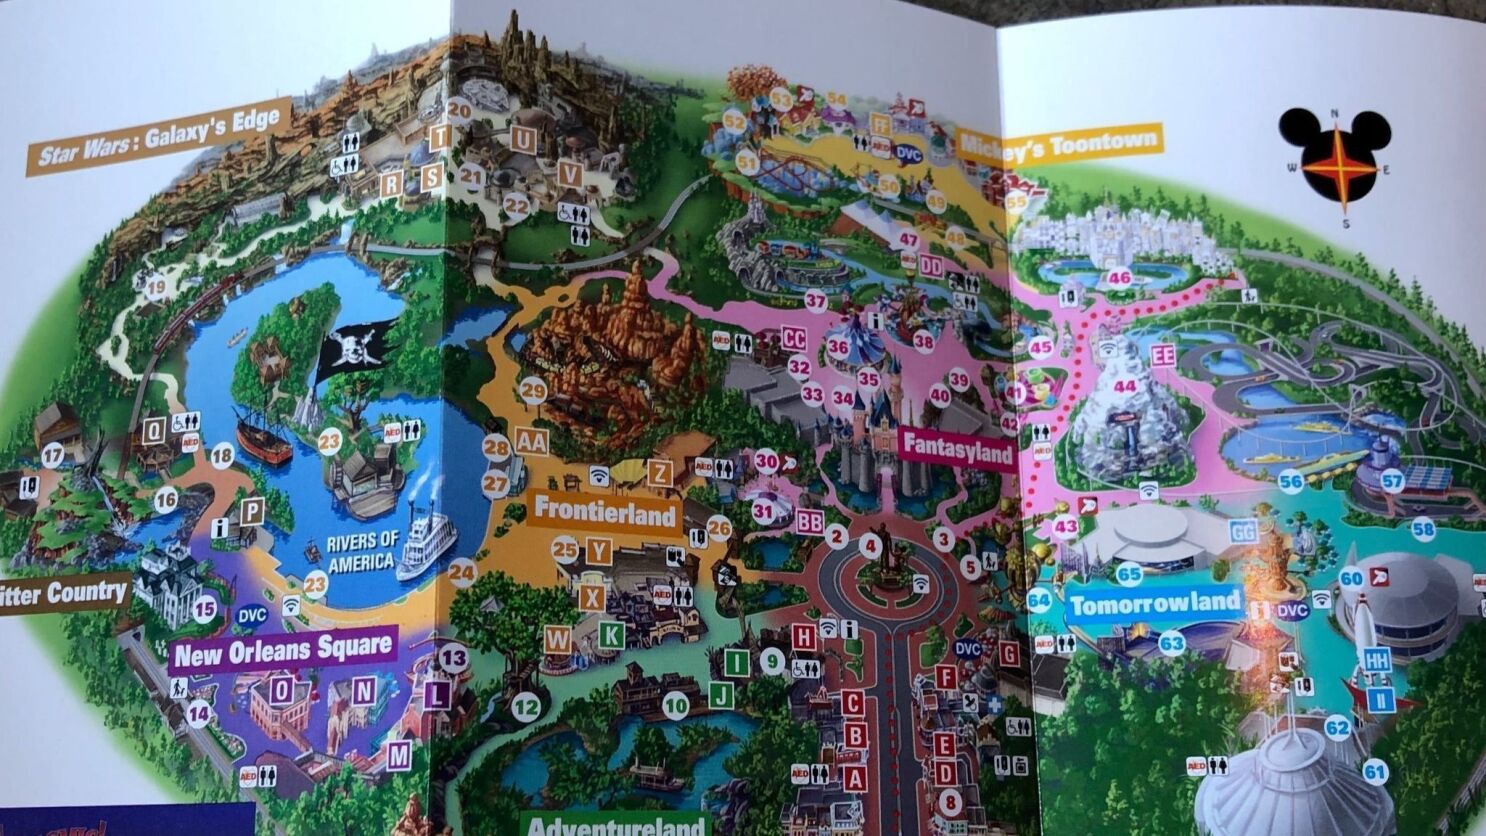 disneyland los angeles map Here S The New Map Of Disneyland With Star Wars Galaxy S Edge Los Angeles Times disneyland los angeles map